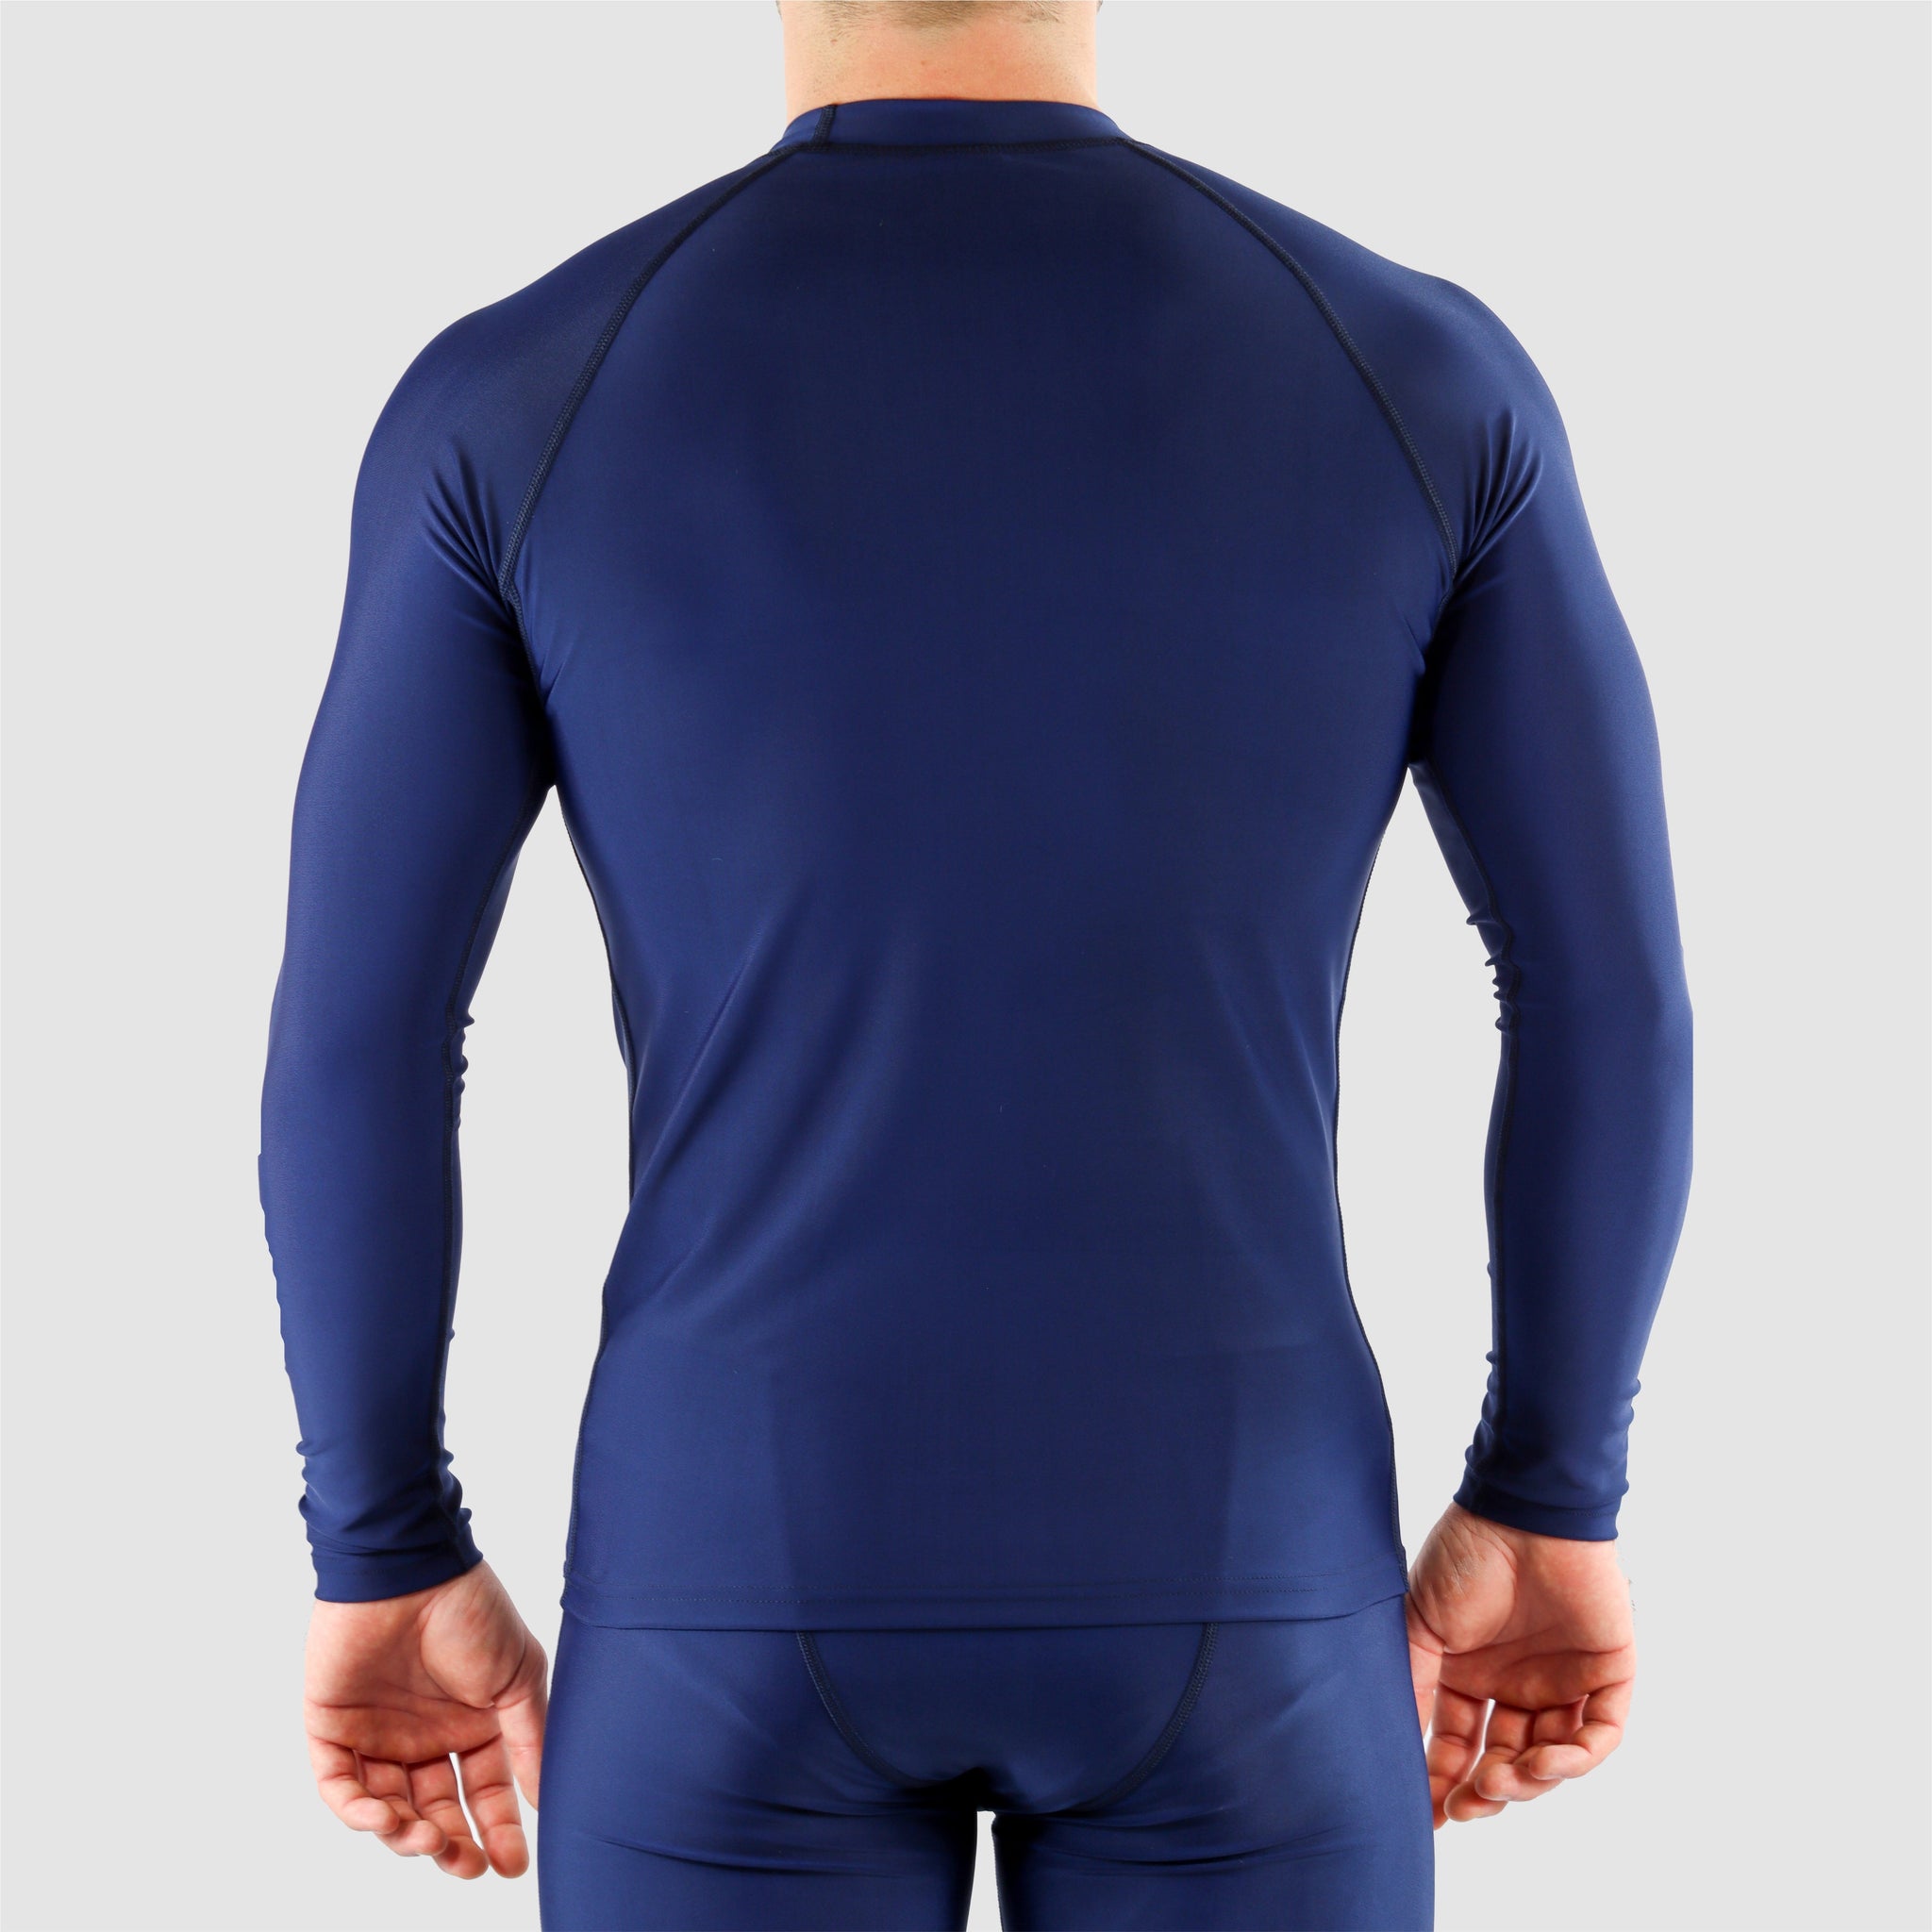 Navy Blue DiDOO Men's Compression Baselayer Top Long Sleeve